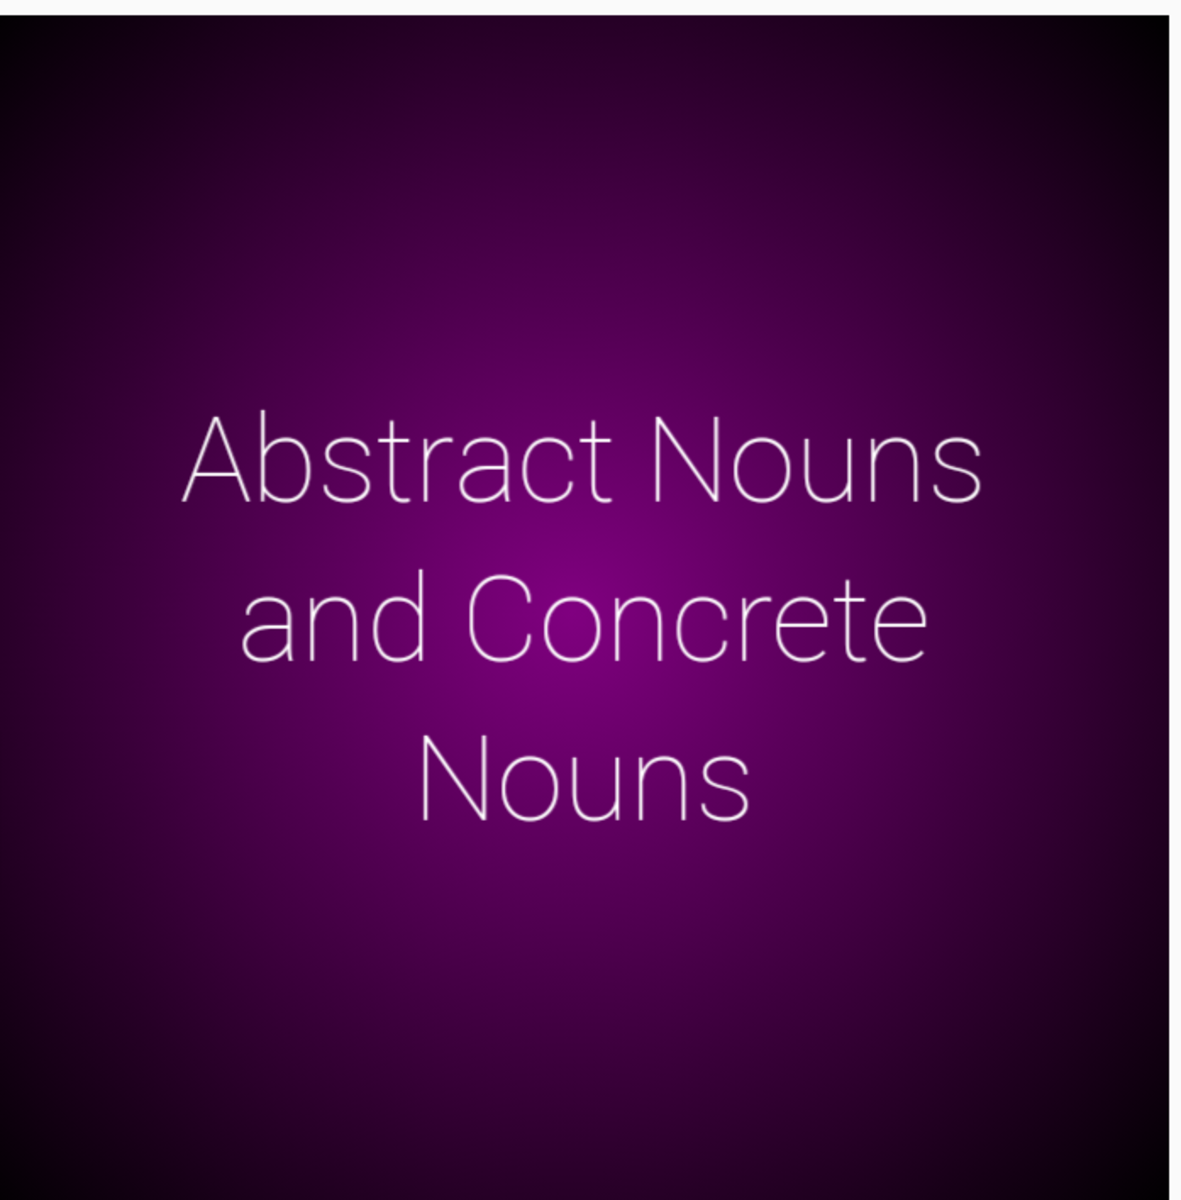 how-to-use-abstract-nouns-and-concrete-nouns-to-better-your-writing